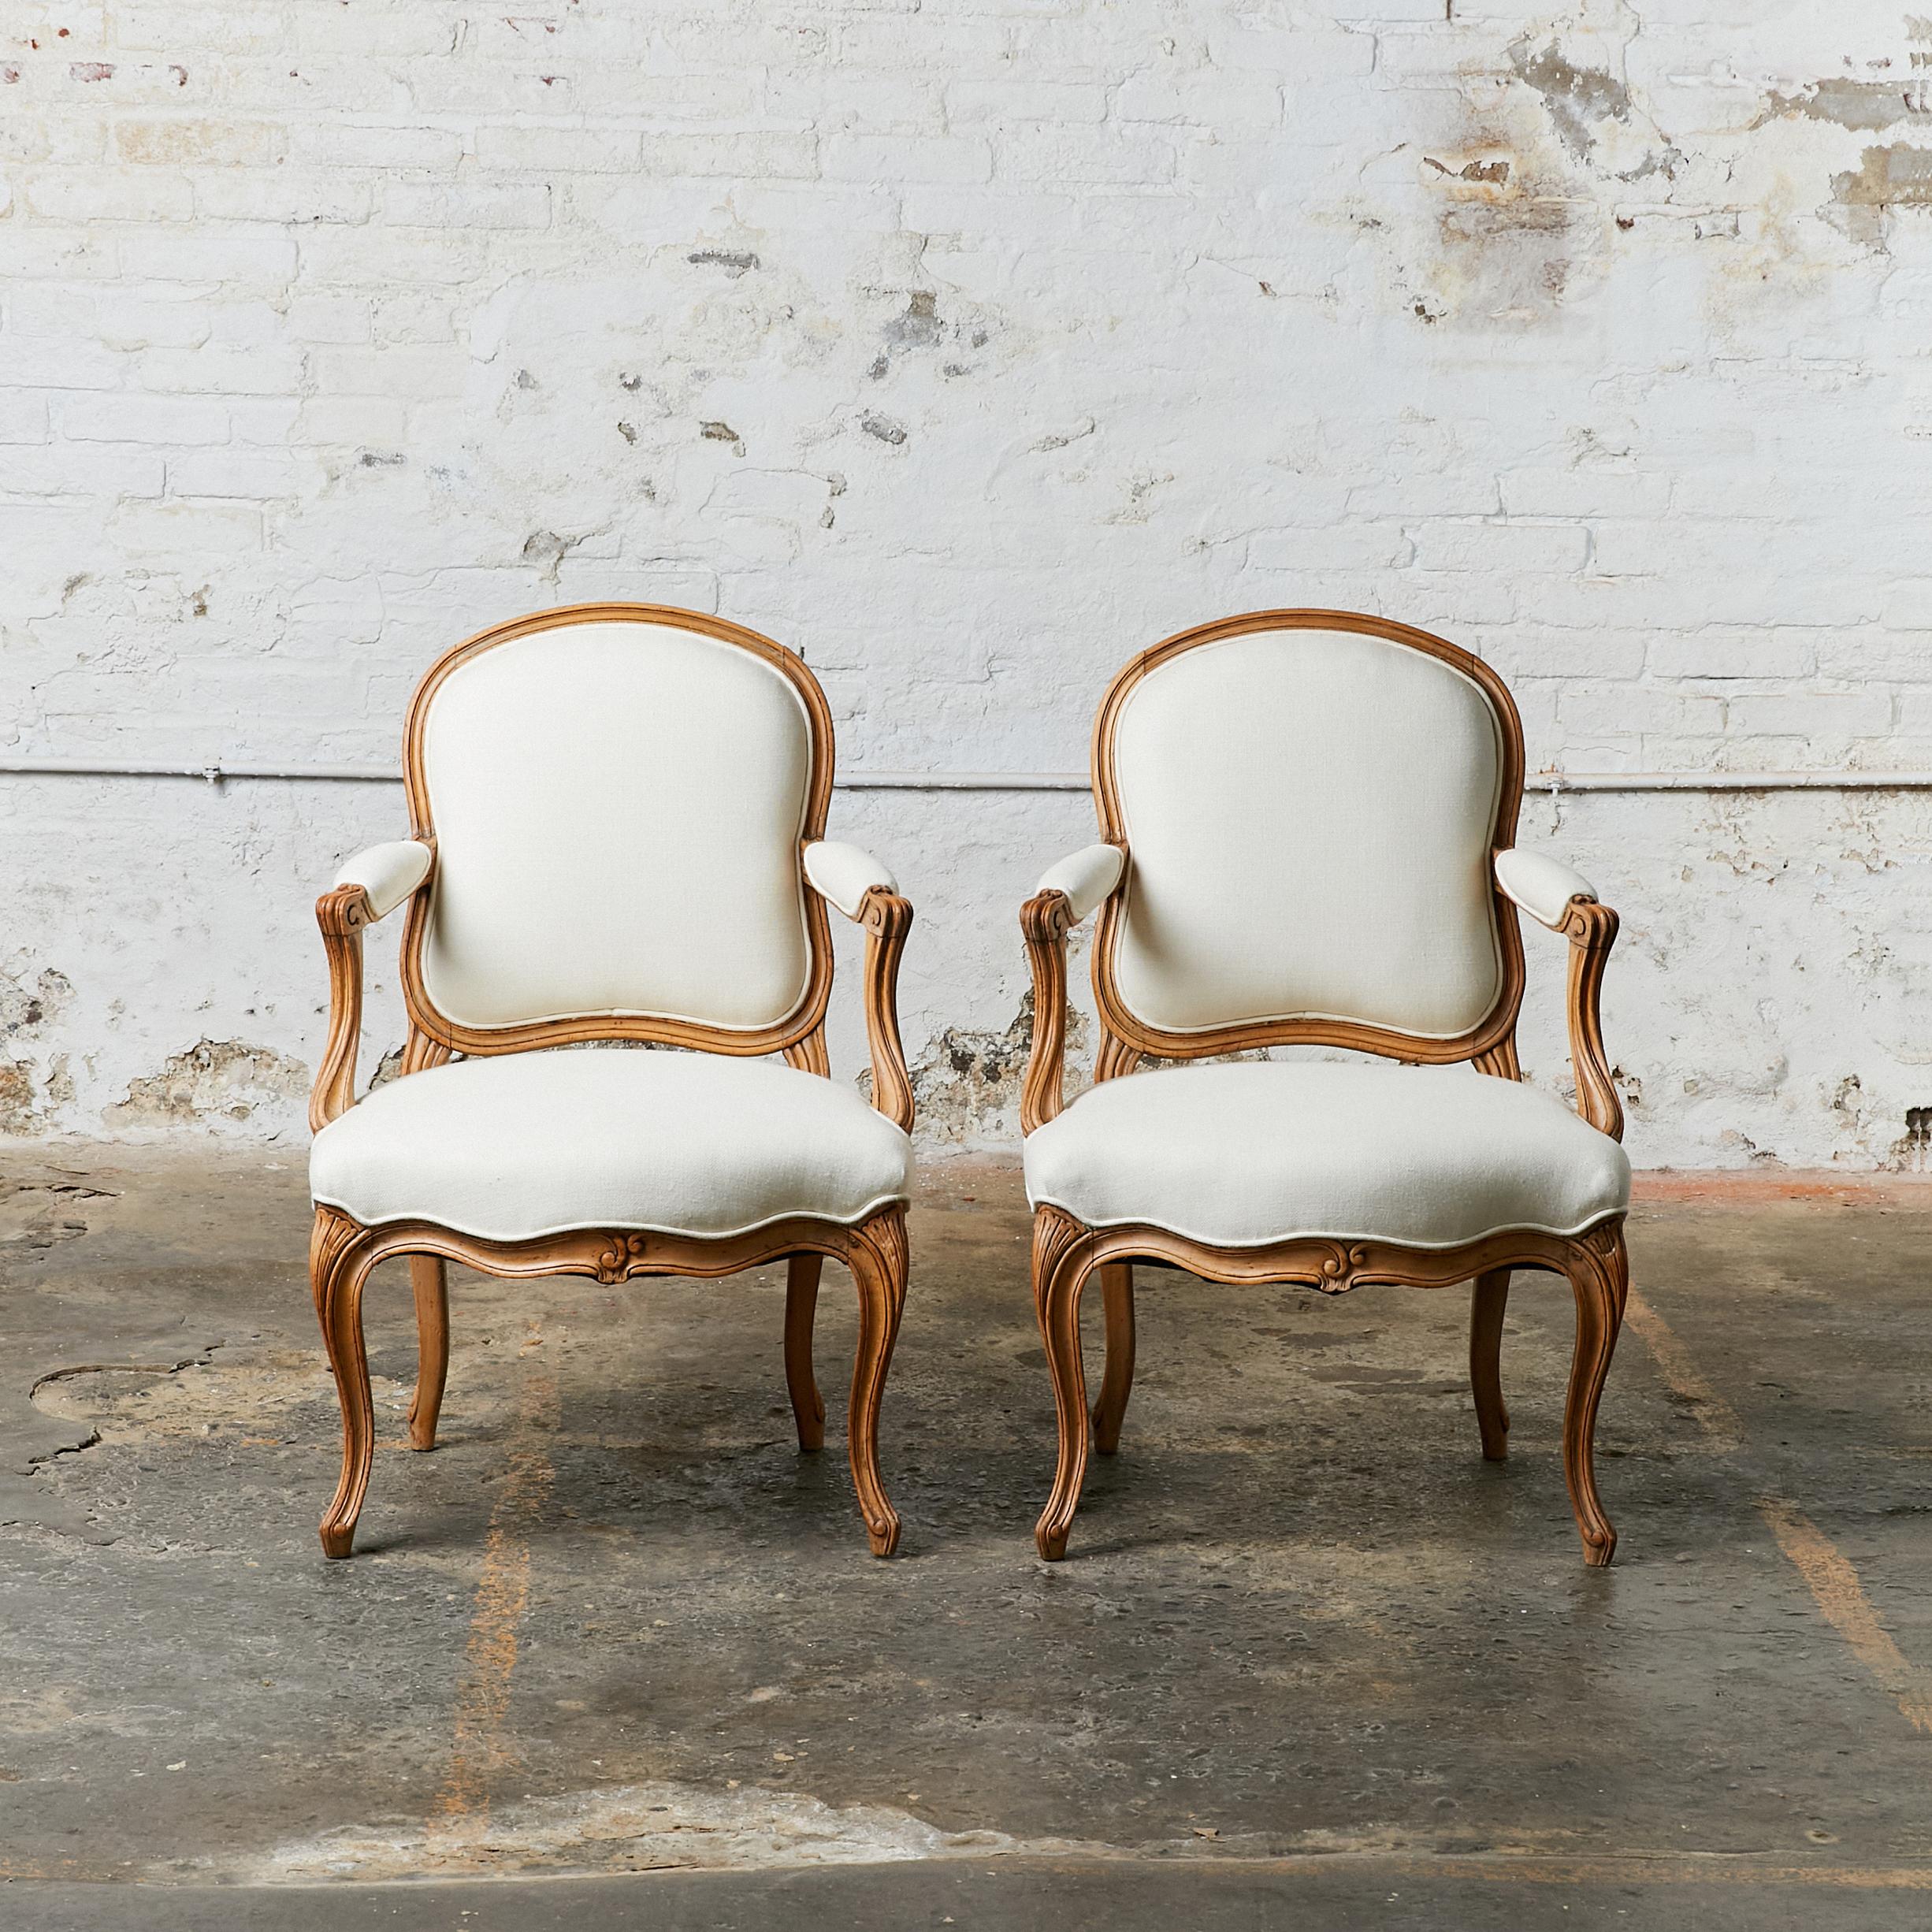 Set of two Louis XV style chairs with shaped back and open arm. The frame has been re-finished in the natural wood. Seat and back upholstered in off white linen with antique bronze studs.